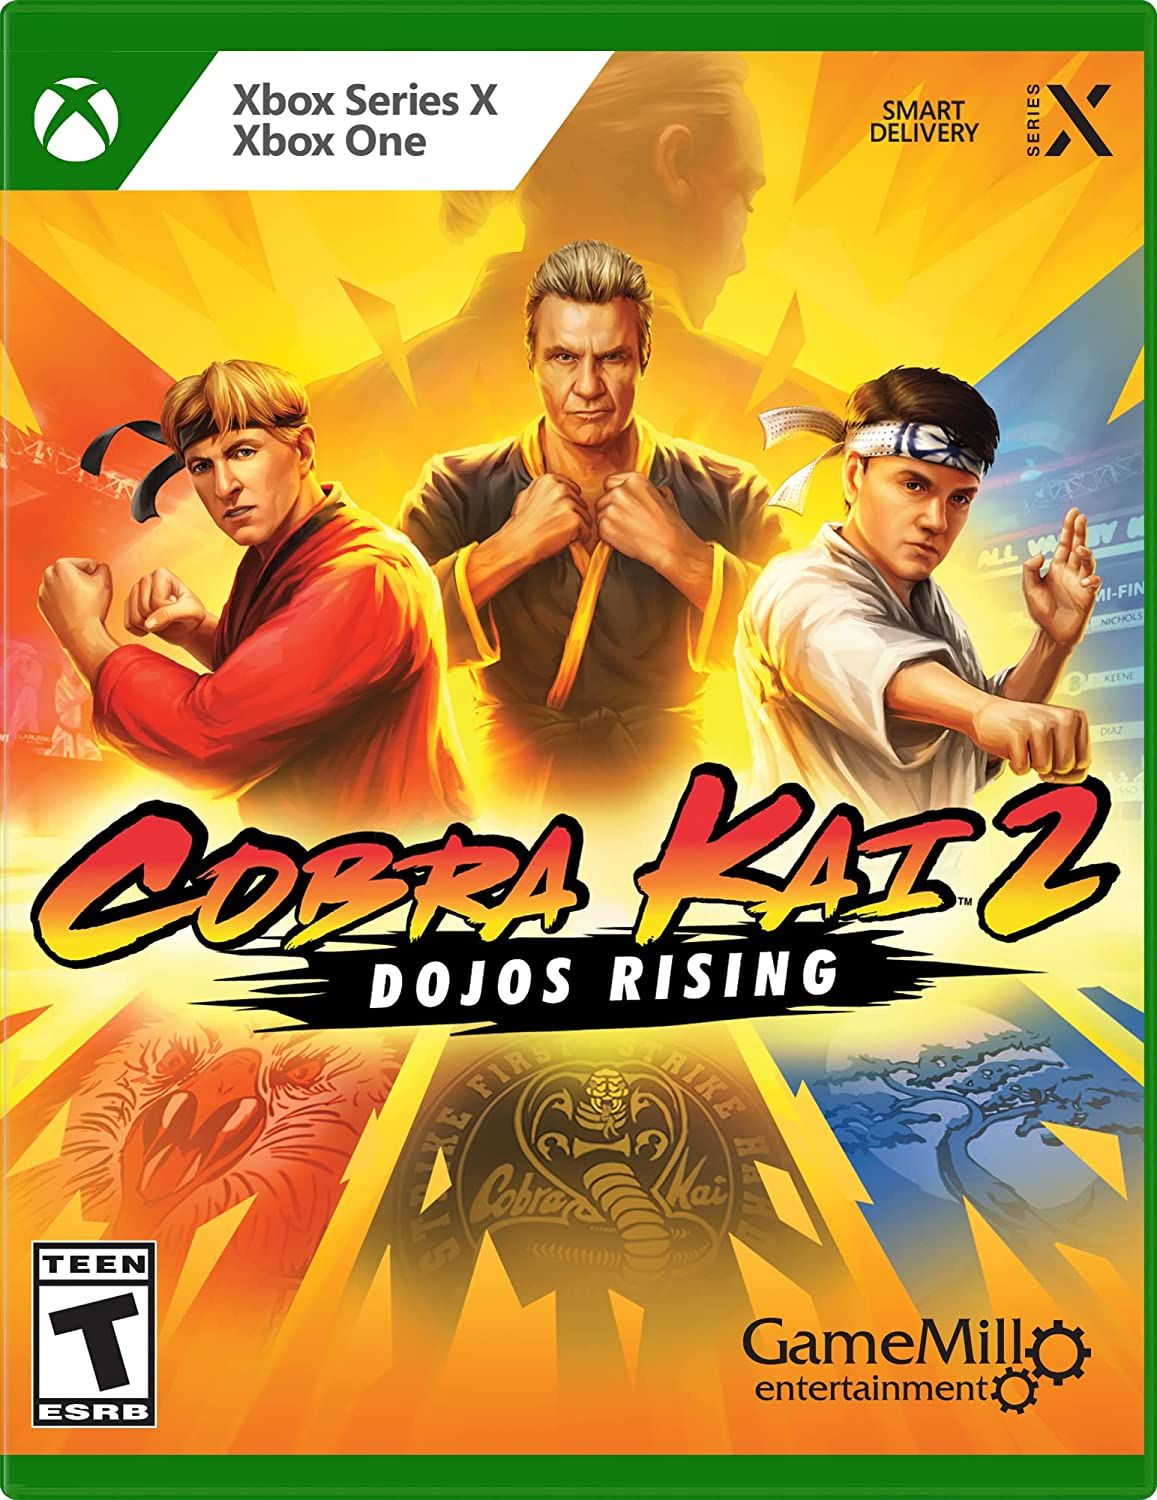 act-fast-and-get-cobra-kai-2-dojos-rising-for-xbox-for-40-off